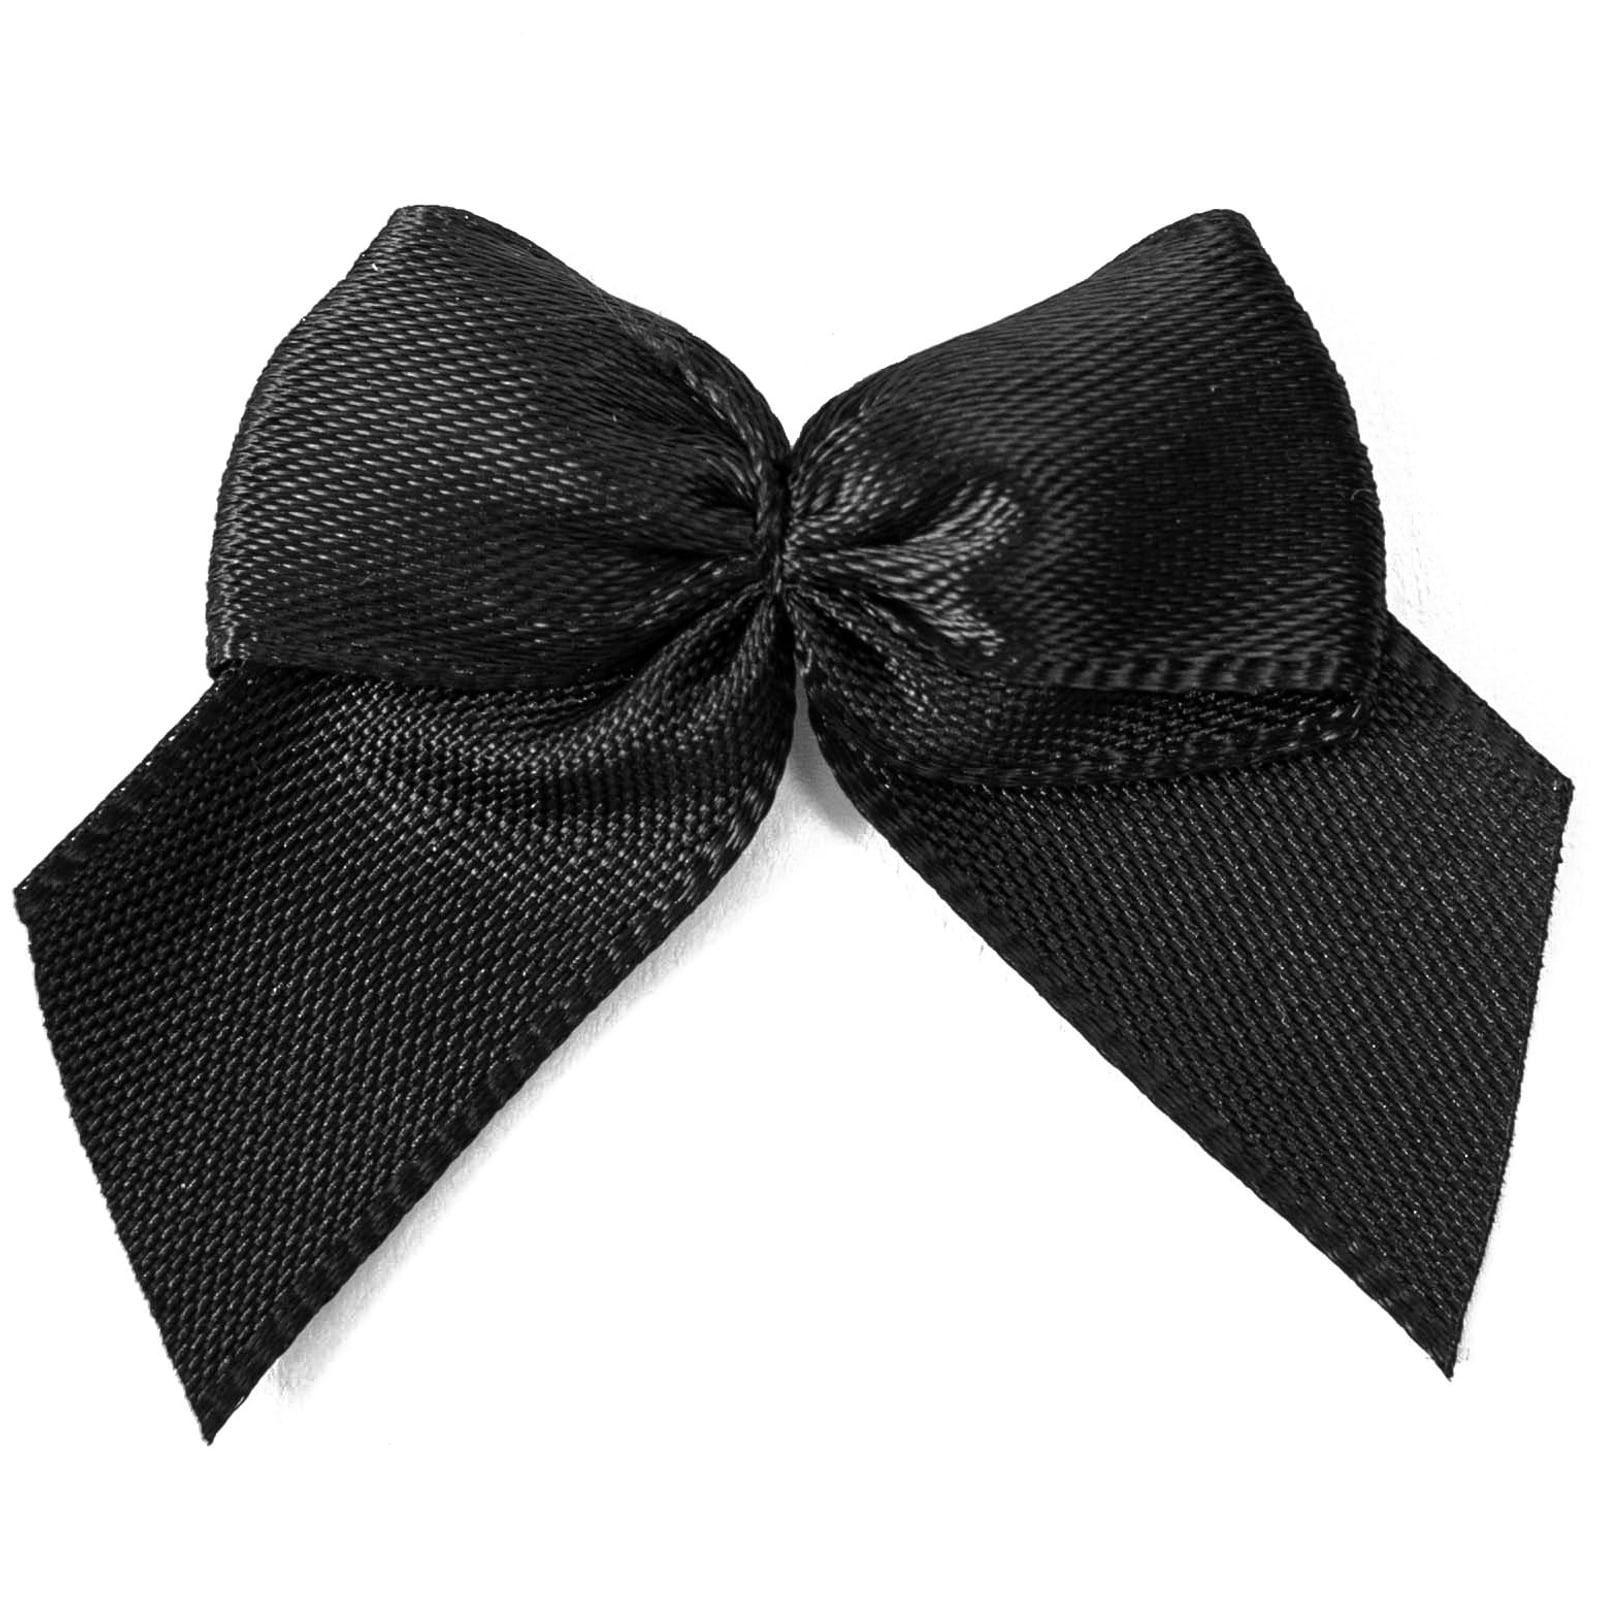 Pre-Tied Black Satin Bows - 4 1/2 Wide, Set of 12, Wired Craft Ribbon,  Valentine's Day, Wedding Embellishments, Gift Bow, Event Decor,  Anniversary